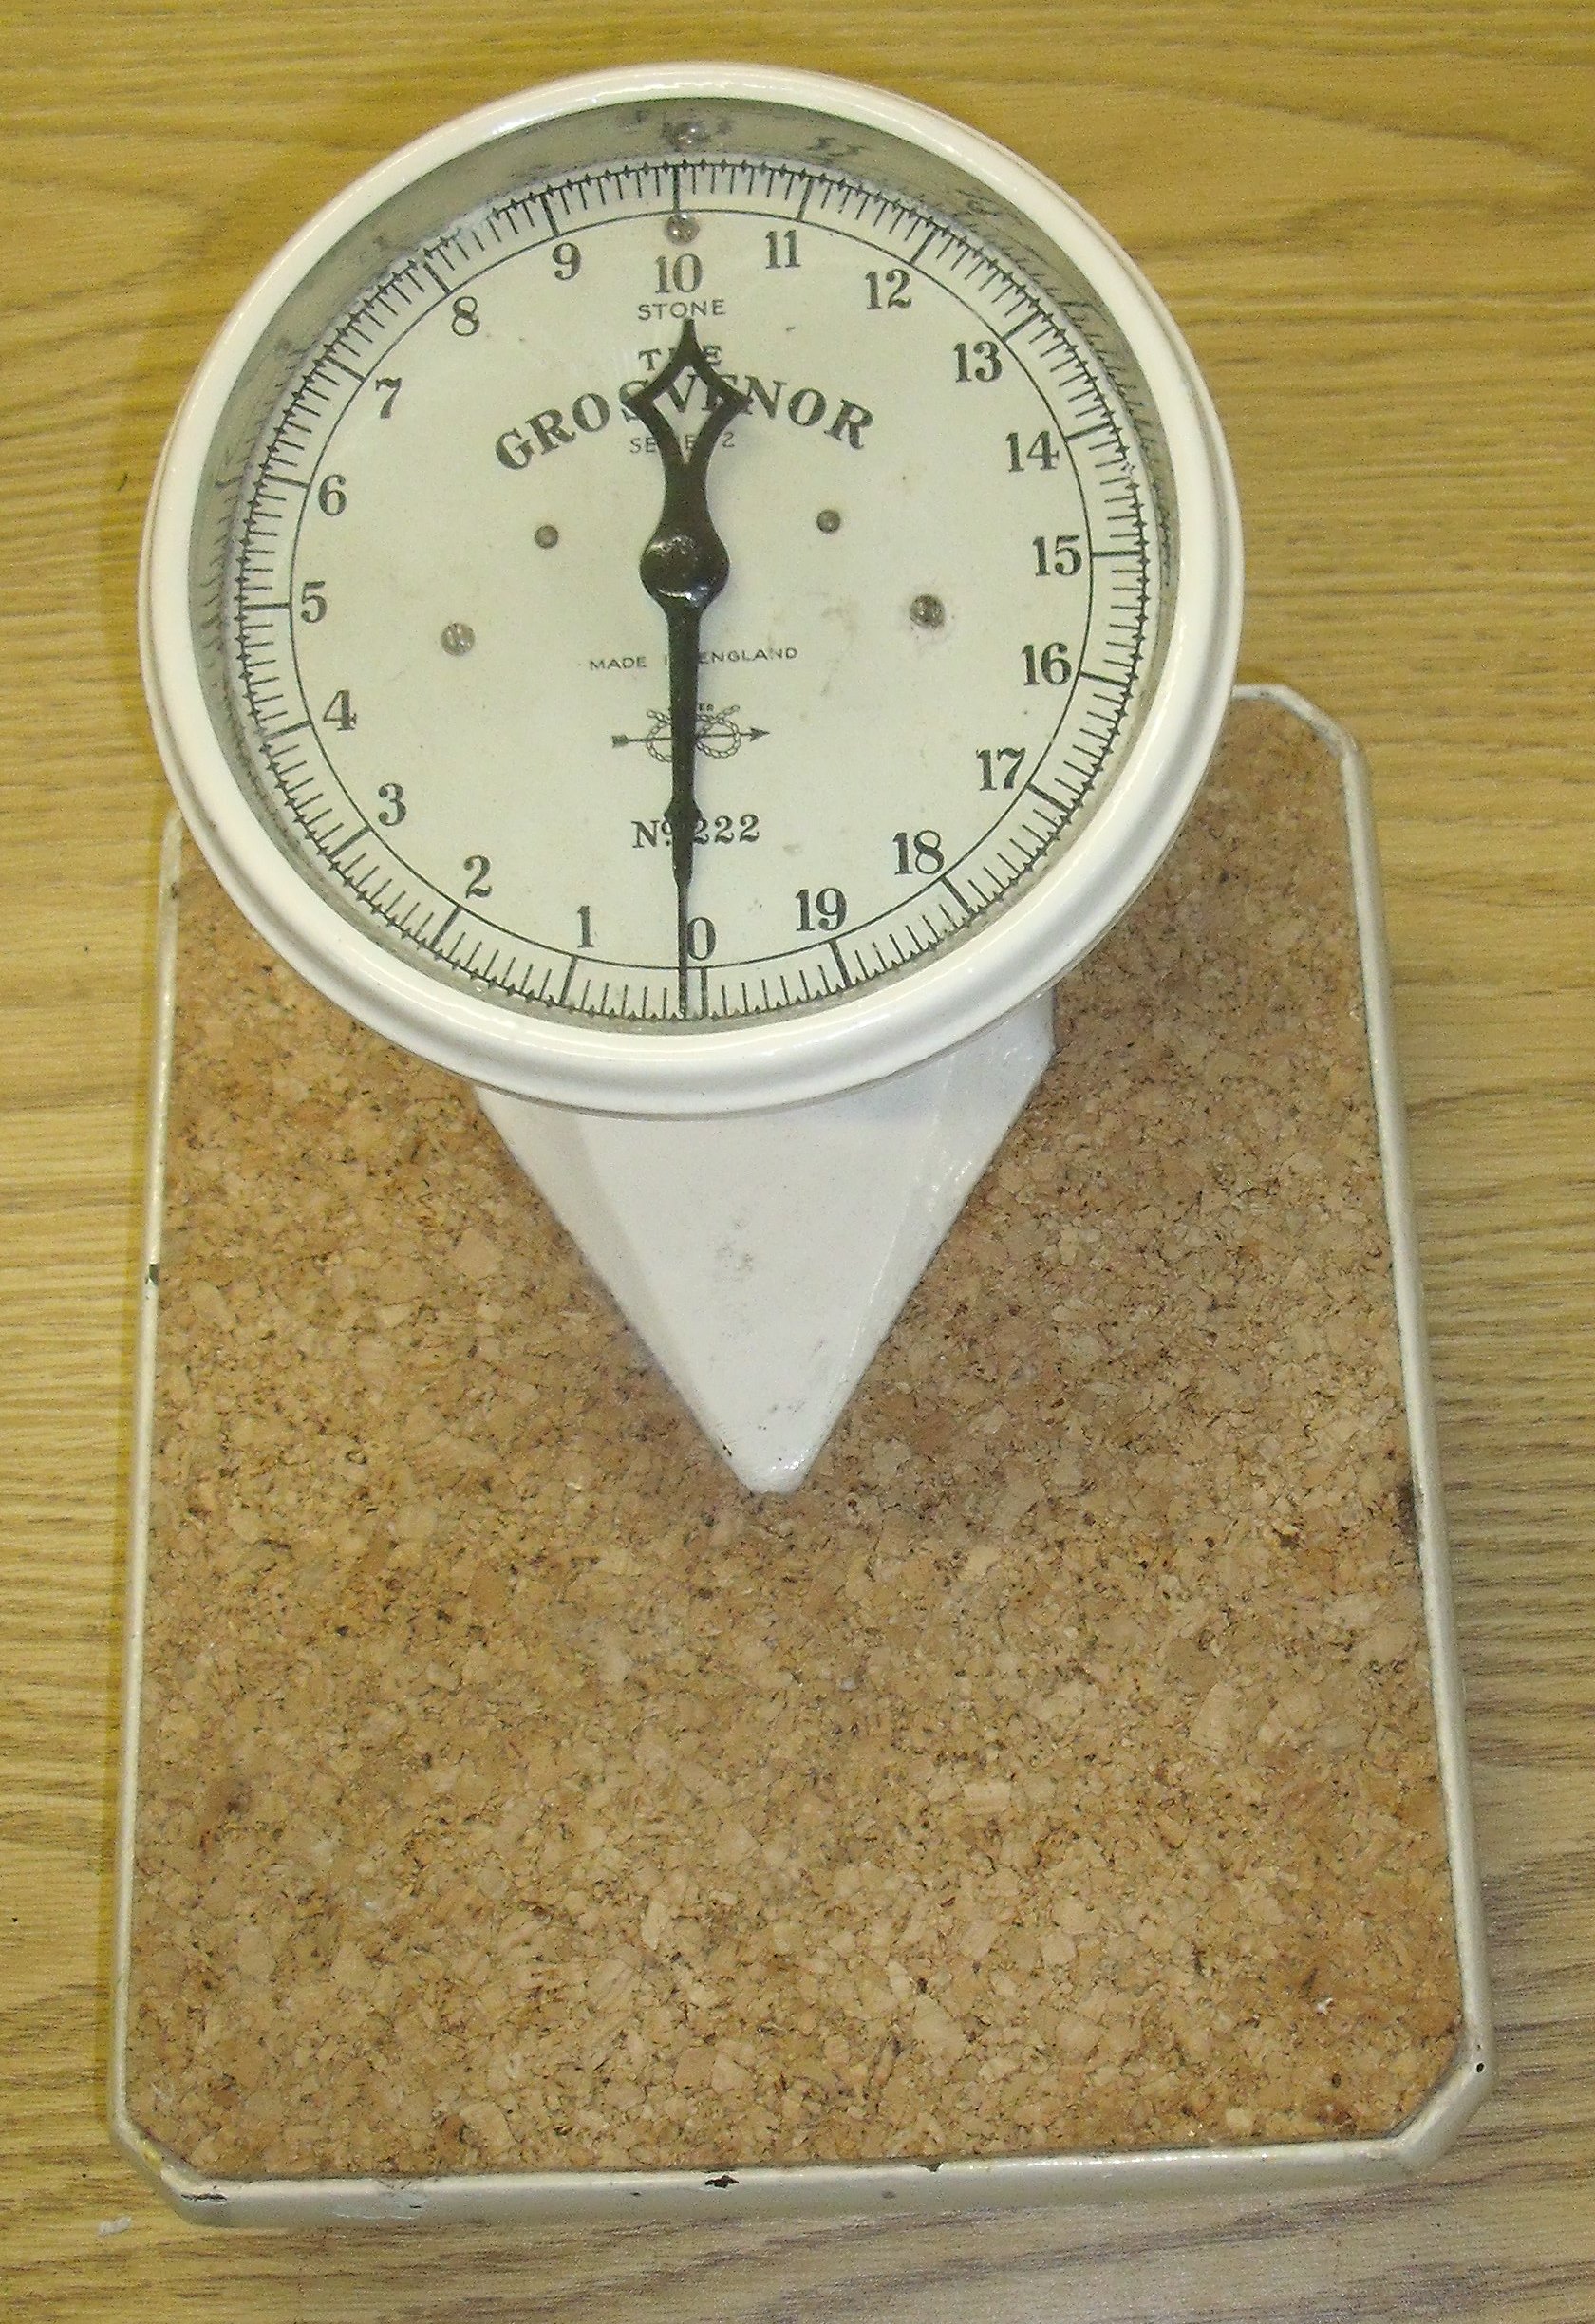 Set of The Grosvenor Series 2 scales